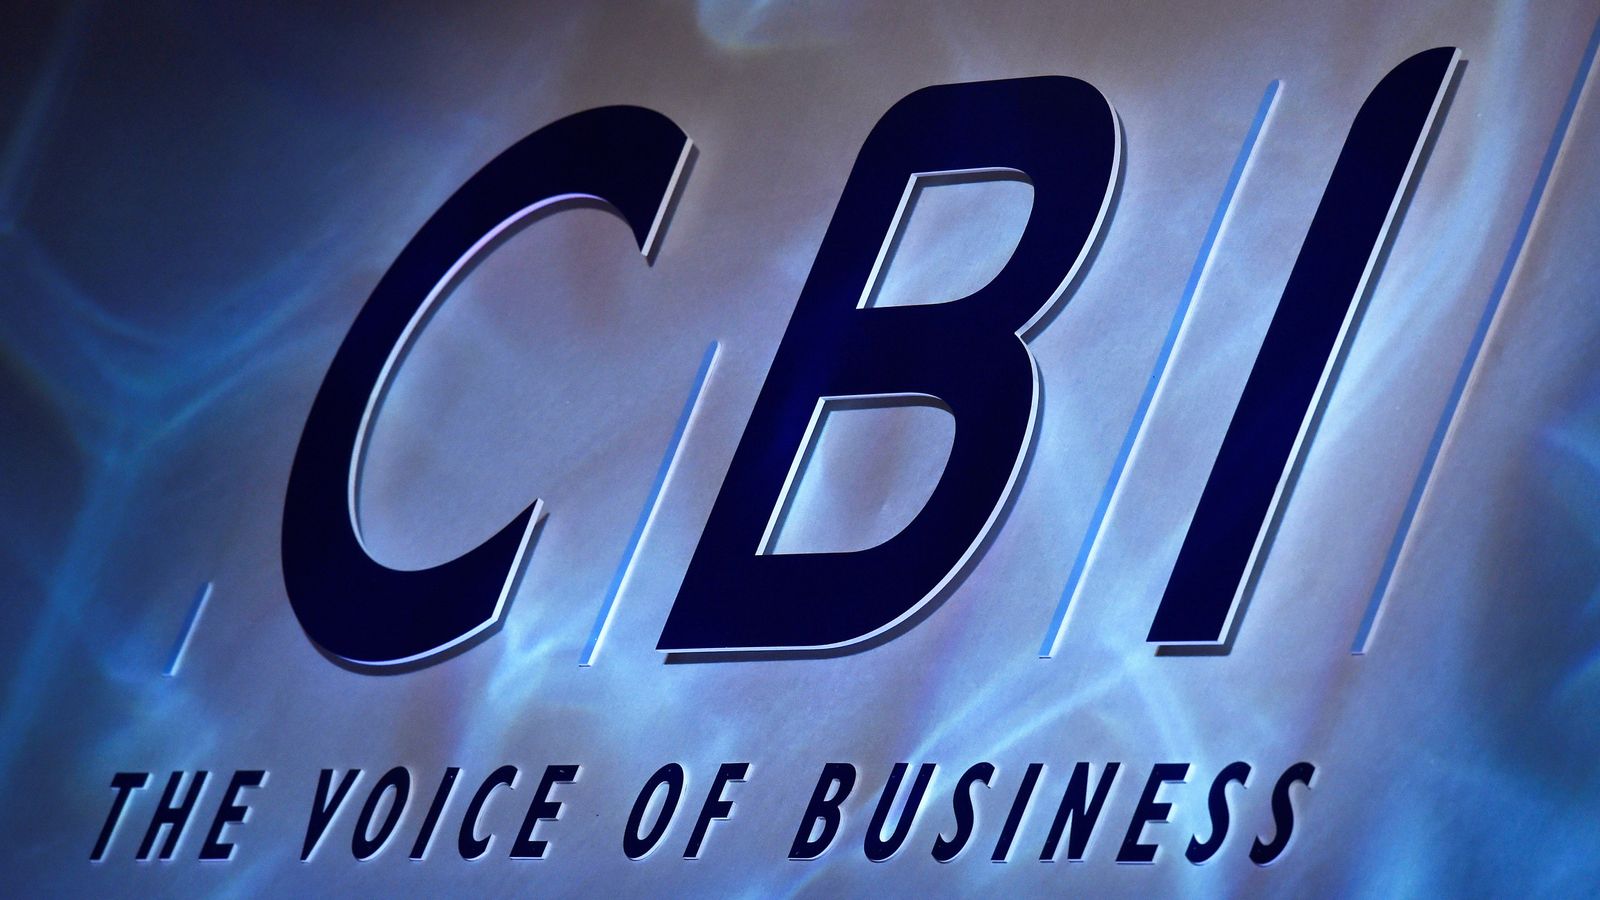 CBI suspends all key activity after membership exodus during day of chaos